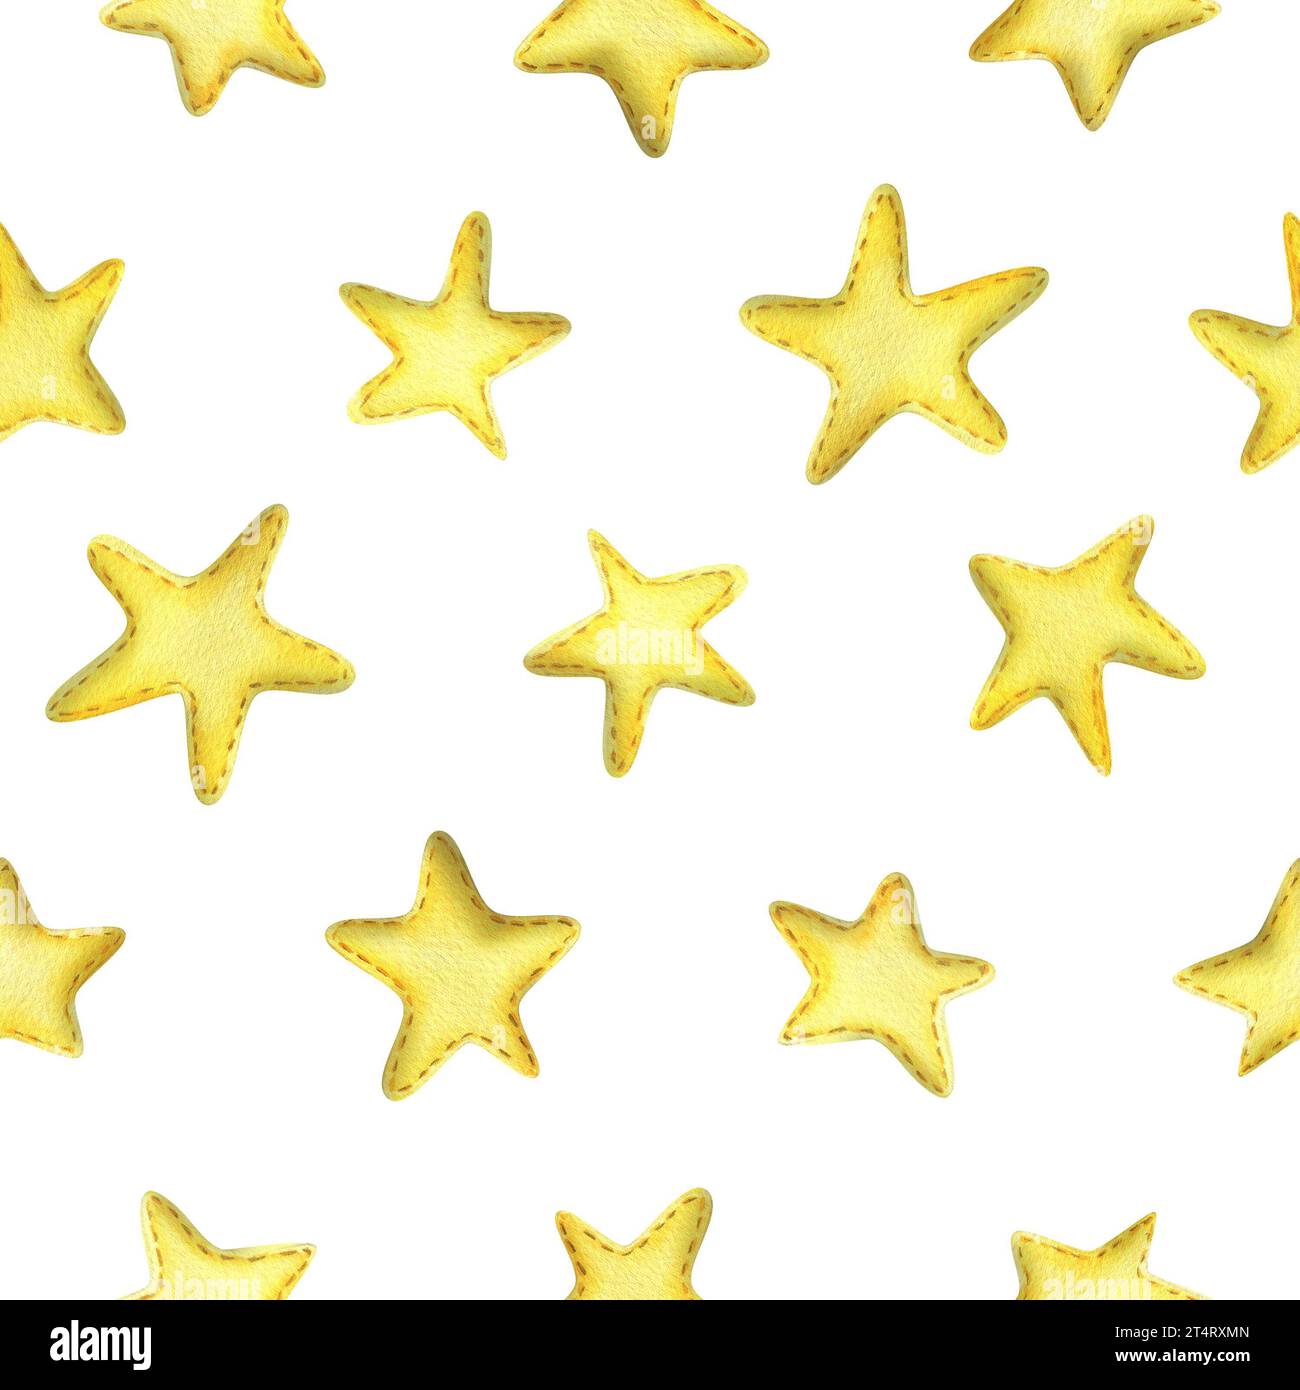 Yellow stars sewn from fabric with thread stitches. Watercolor illustration, hand drawn. Seamless pattern on a white background Stock Photo